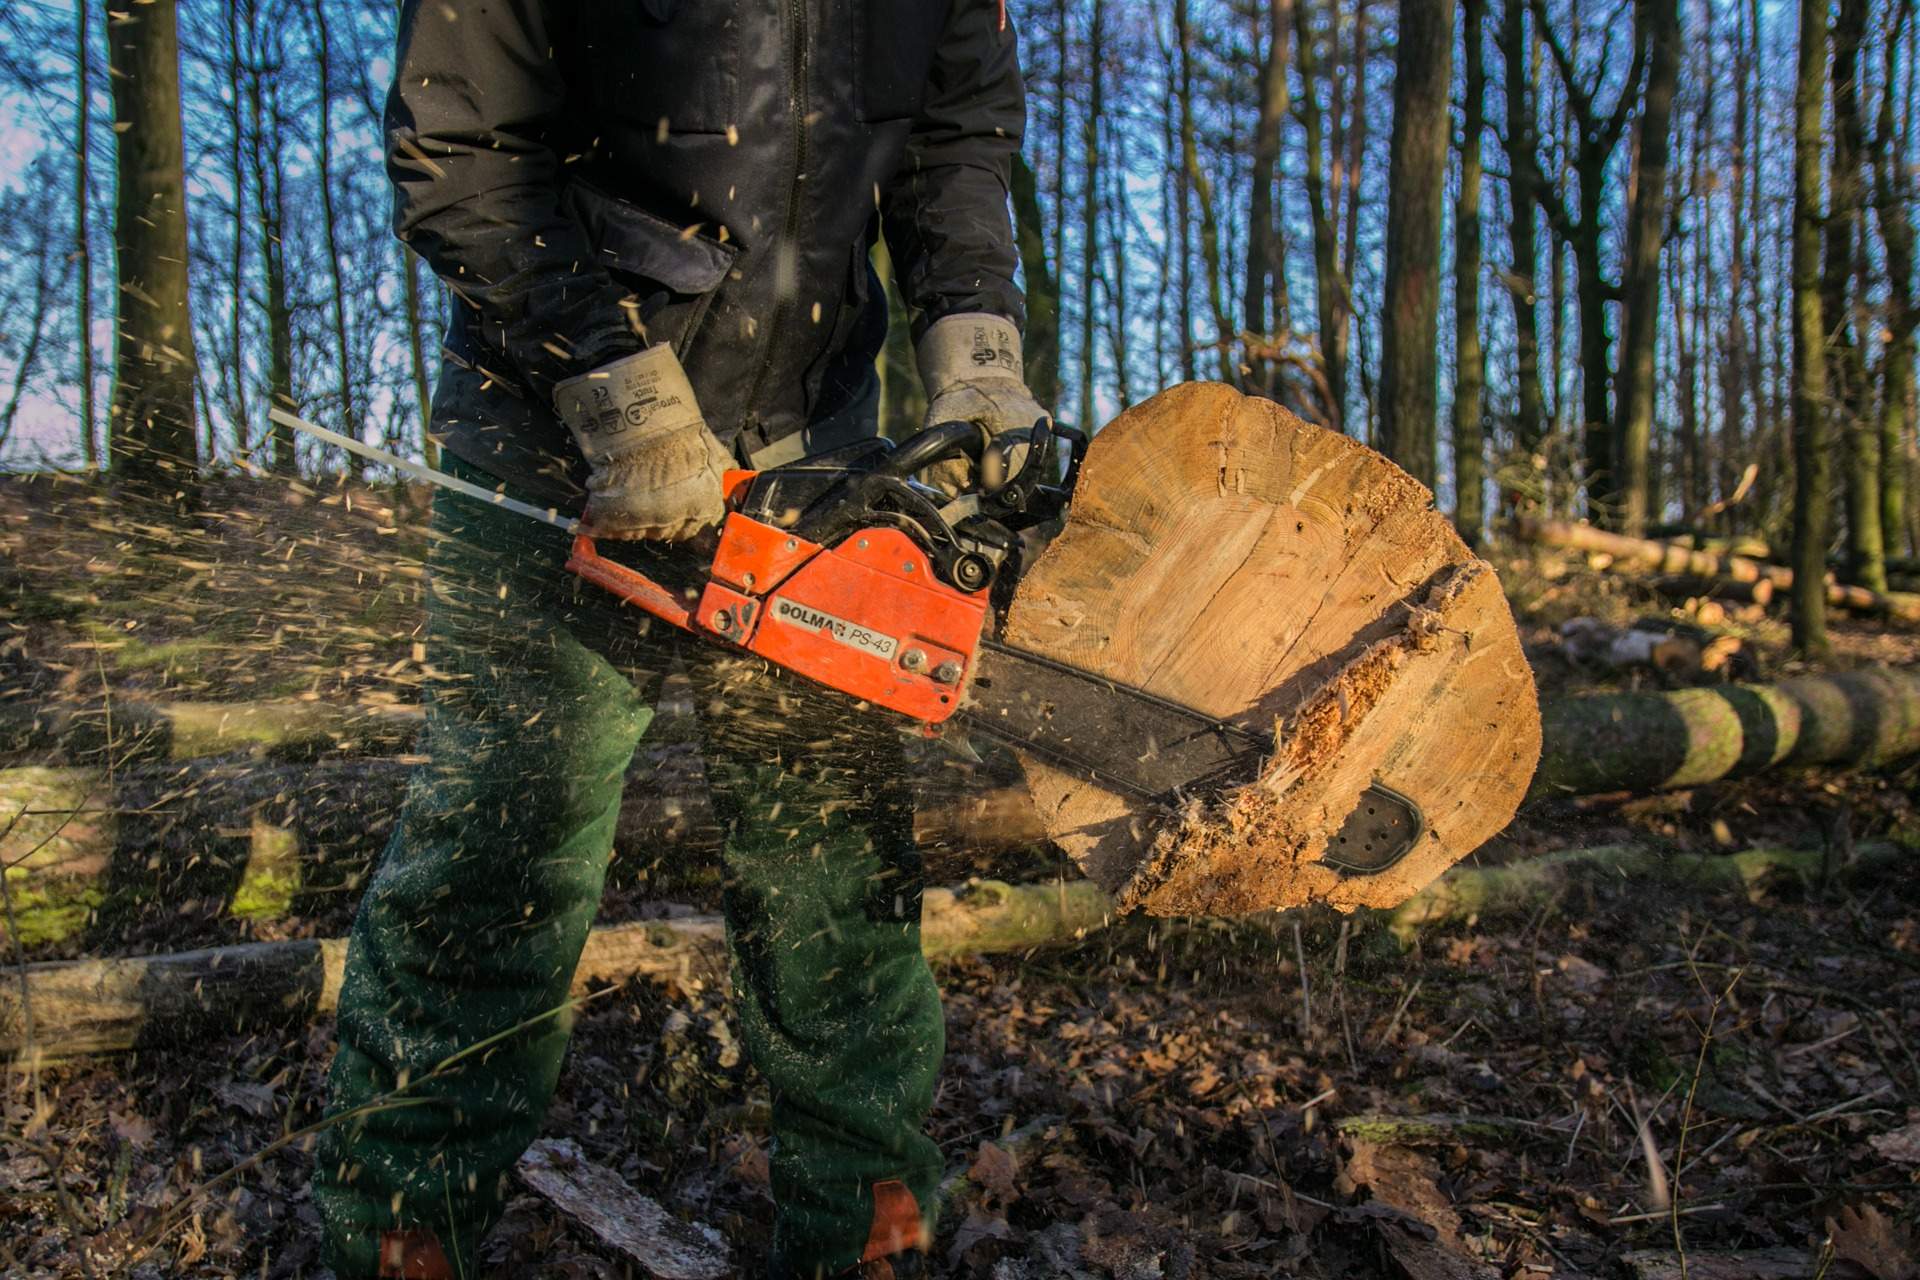 The Different Types of Chain Saw: You Should Know